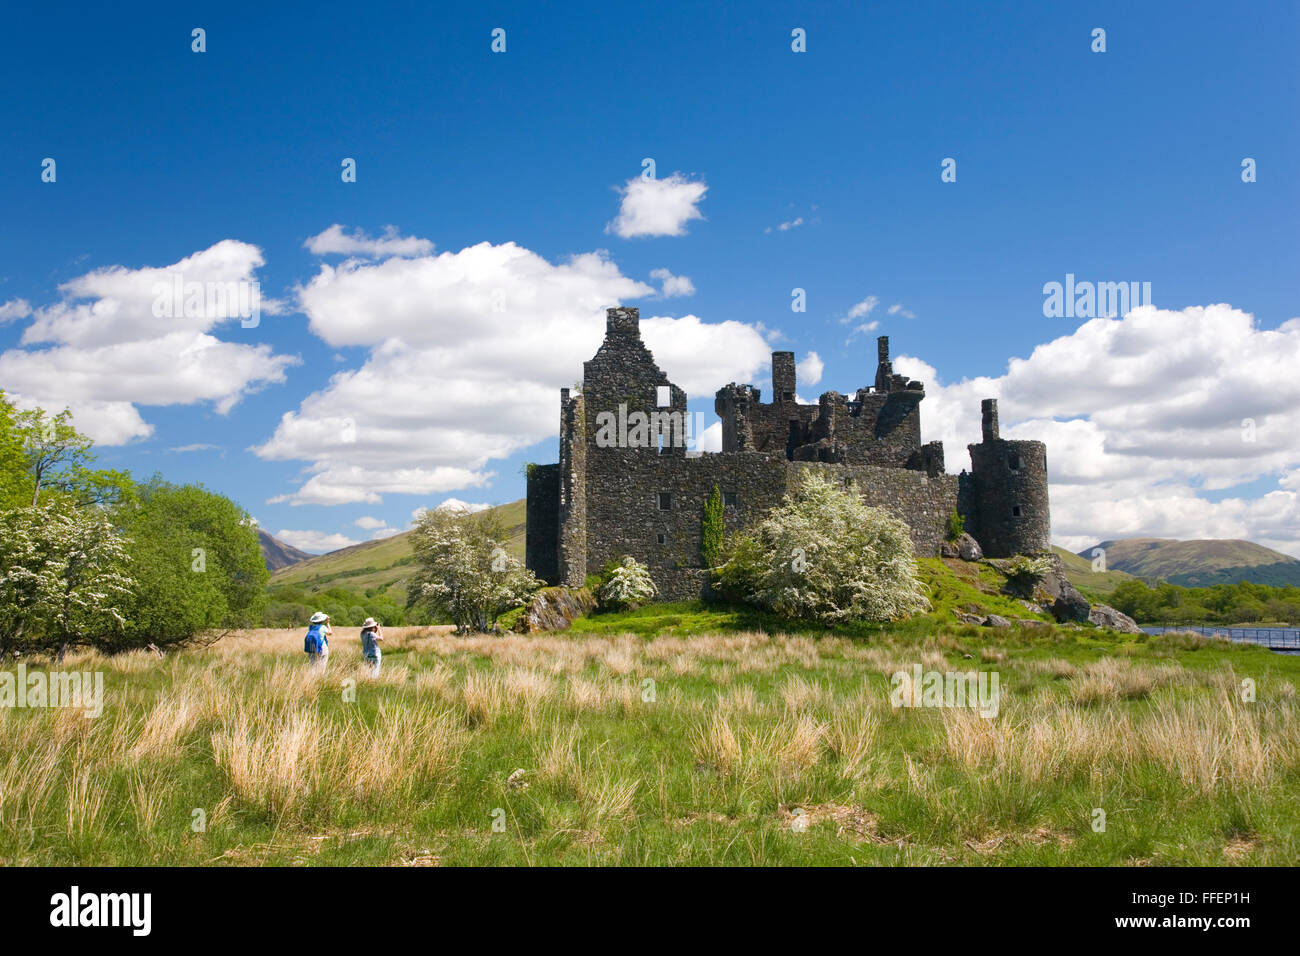 Dalmally, Argyll and Bute, Scotland. View to the ruins of Kilchurn Castle, visitors taking photographs. Stock Photo